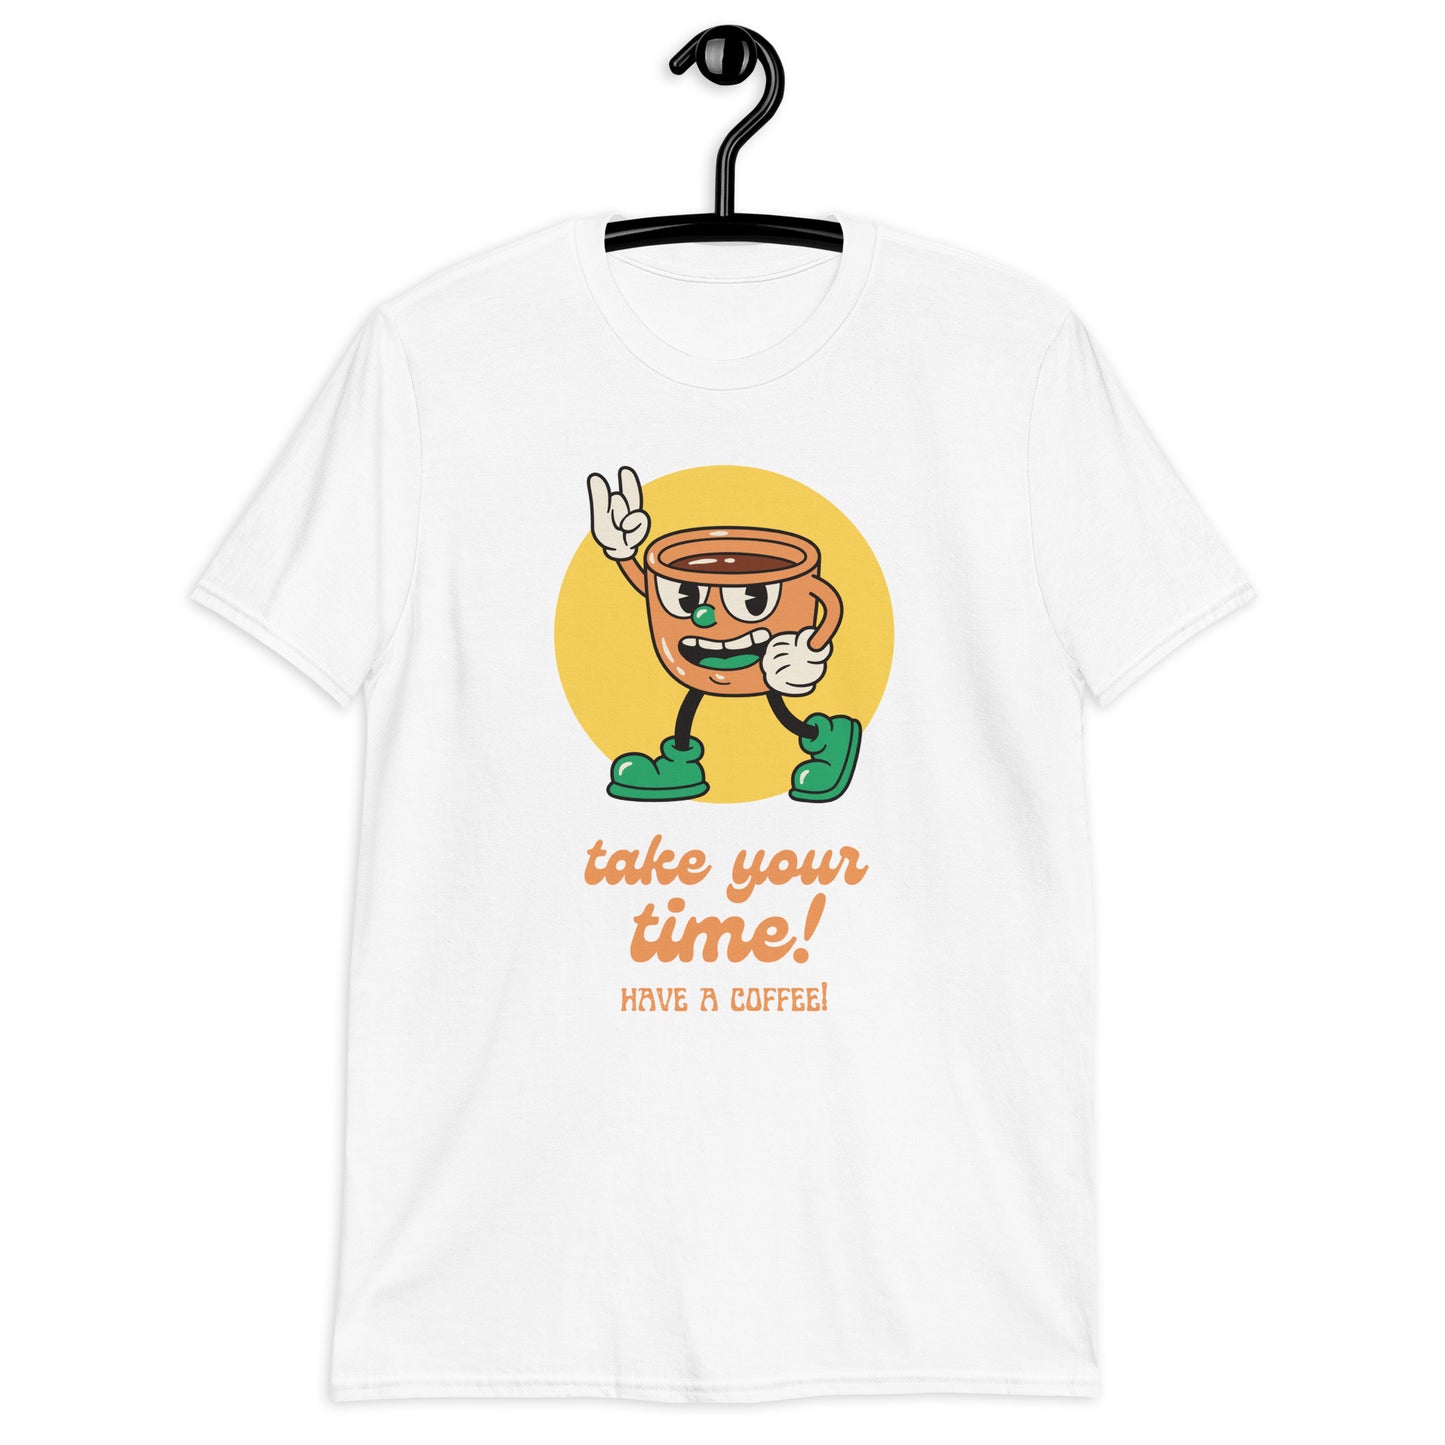 Take Your Time, Have A Coffee - Short-Sleeve Unisex T-Shirt Unisex T-shirt Coffee Retro